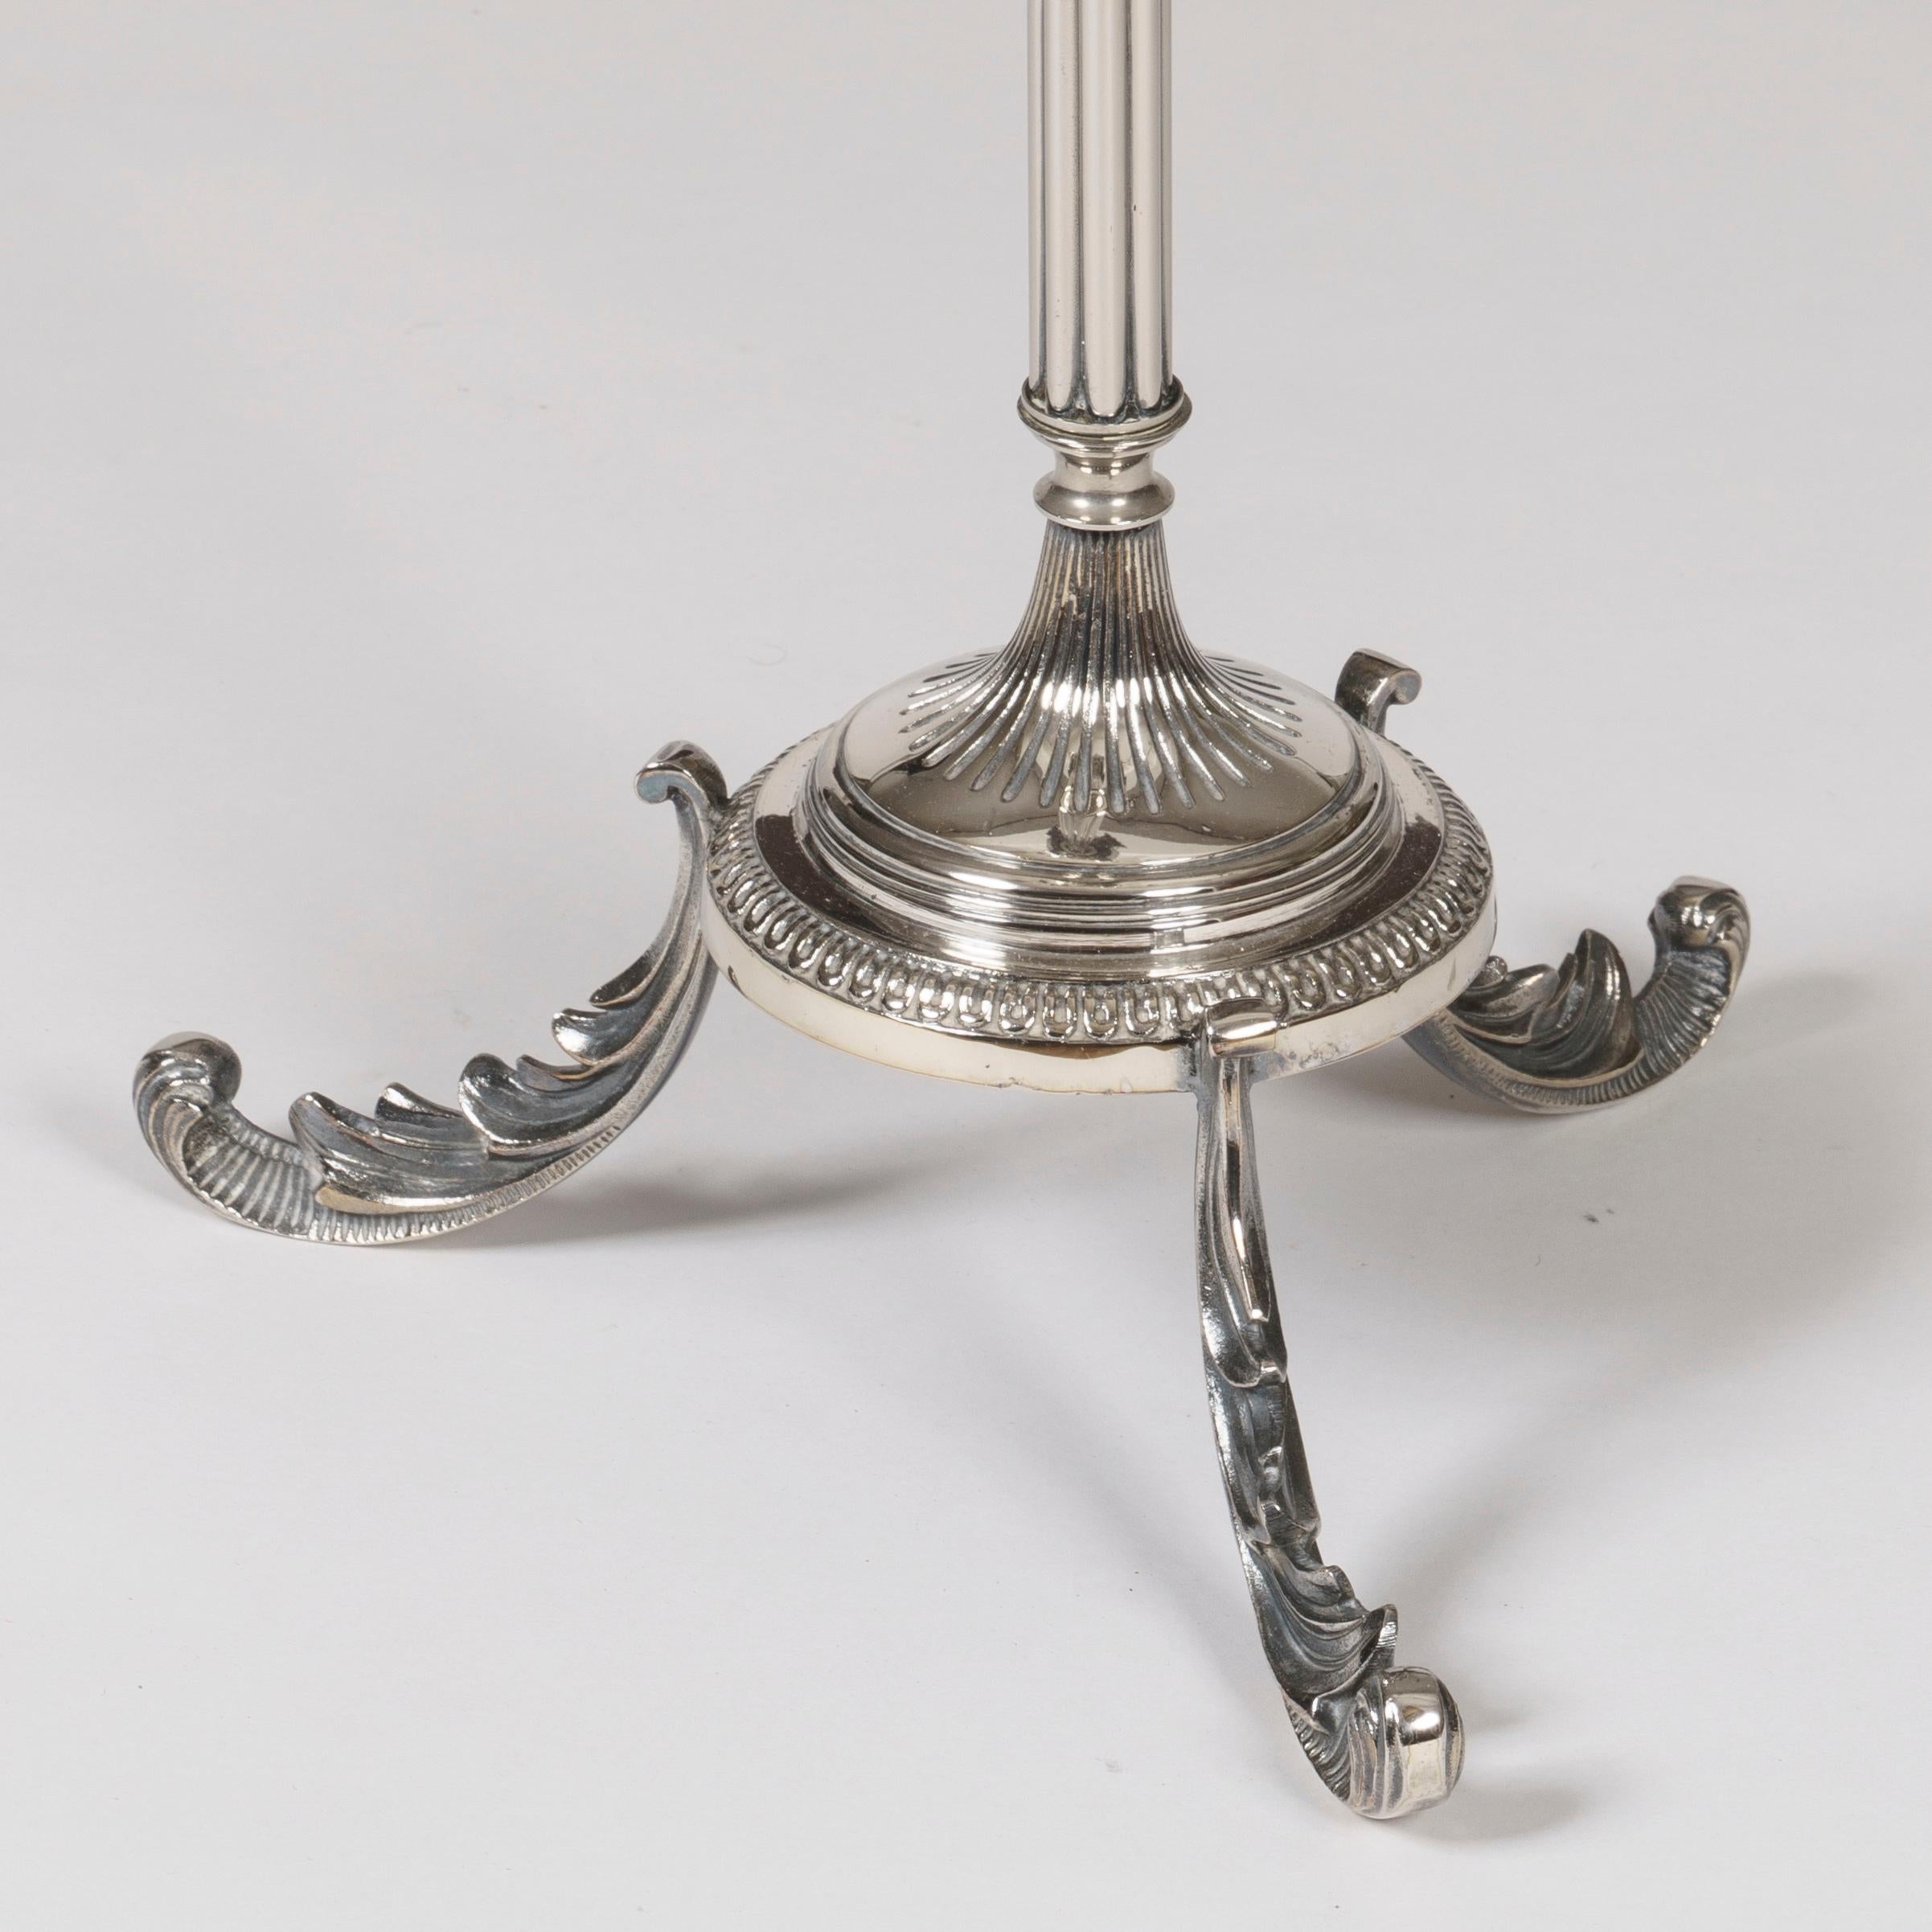 A silverplate and baccarat crystal
 Champagne bucket and stand

Rising from scrolling tripartite legs, the reeded columnar stand having a circular fluted base and a flaring apex of four stylized acanthus leaves housing a later associated Baccarat